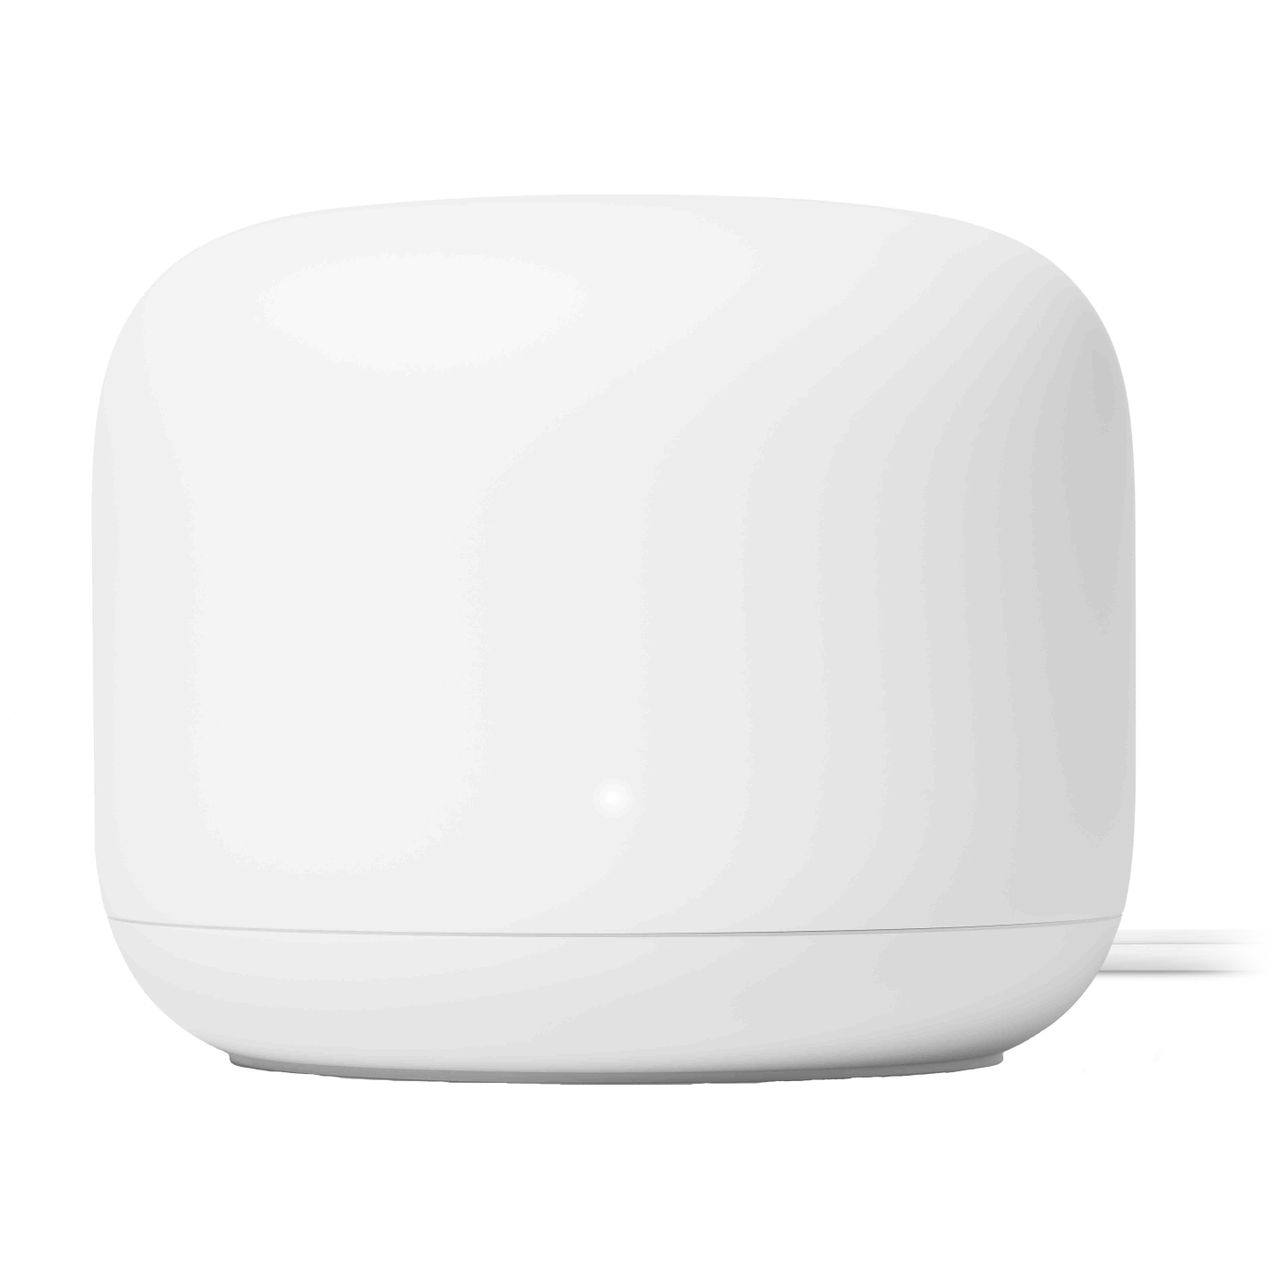 Google Dual Band AC2200 Mesh Network Review